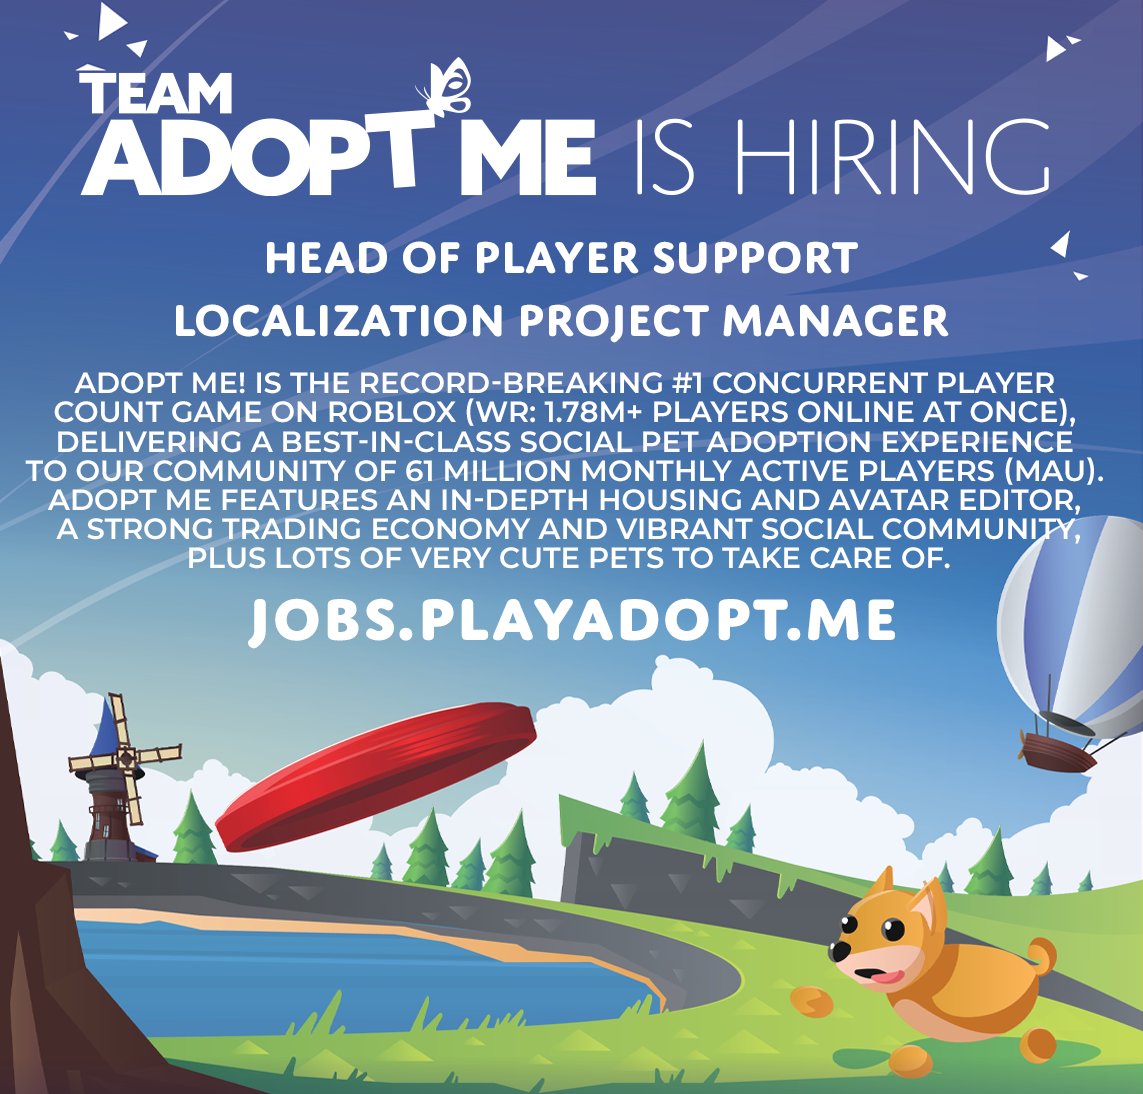 Roblox Adopt Me Jobs - How to Get them and Everything to Know-Game